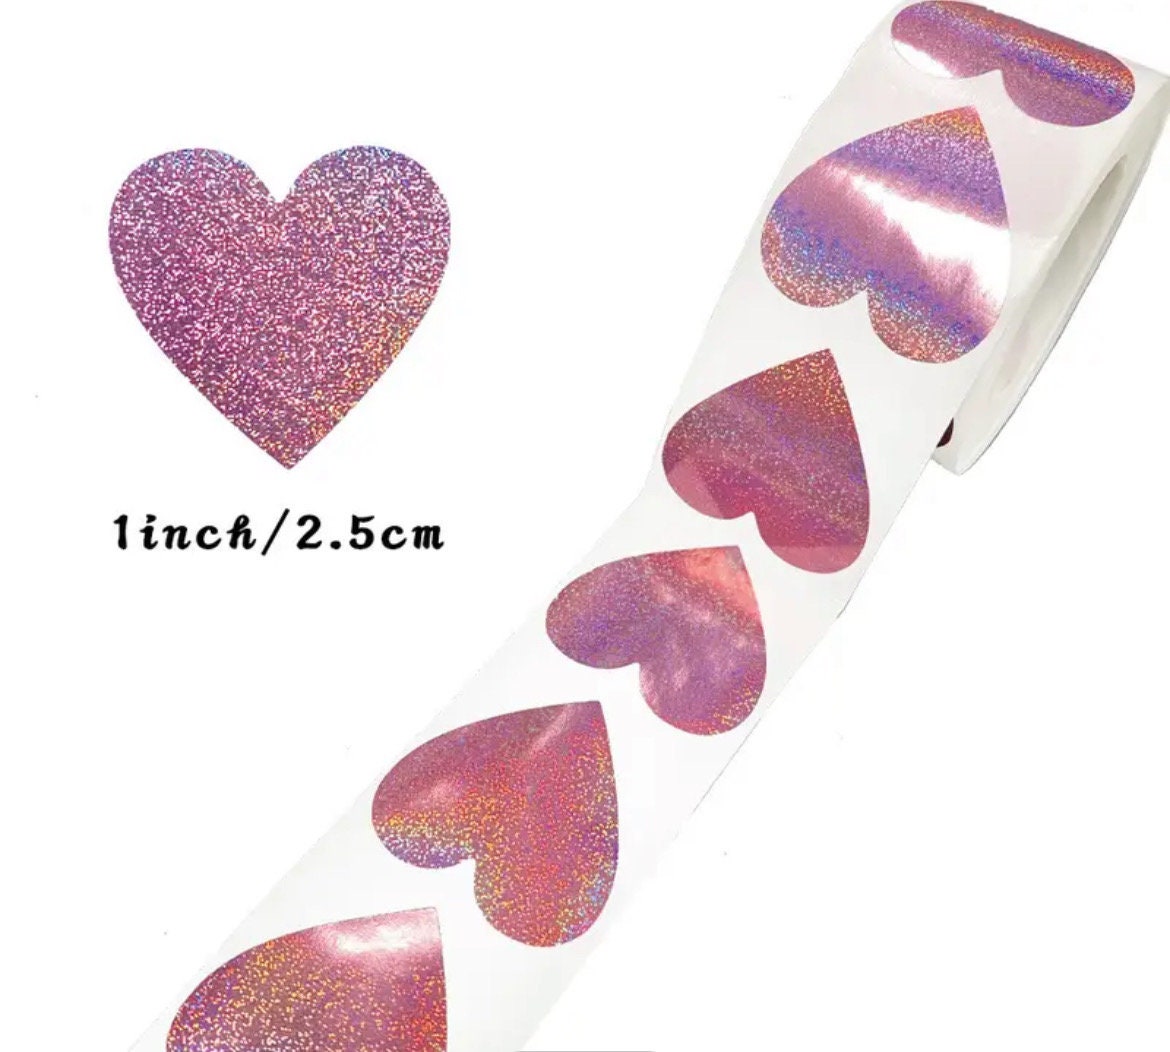 Heart rose pink sparkly craft stickers, 25mm